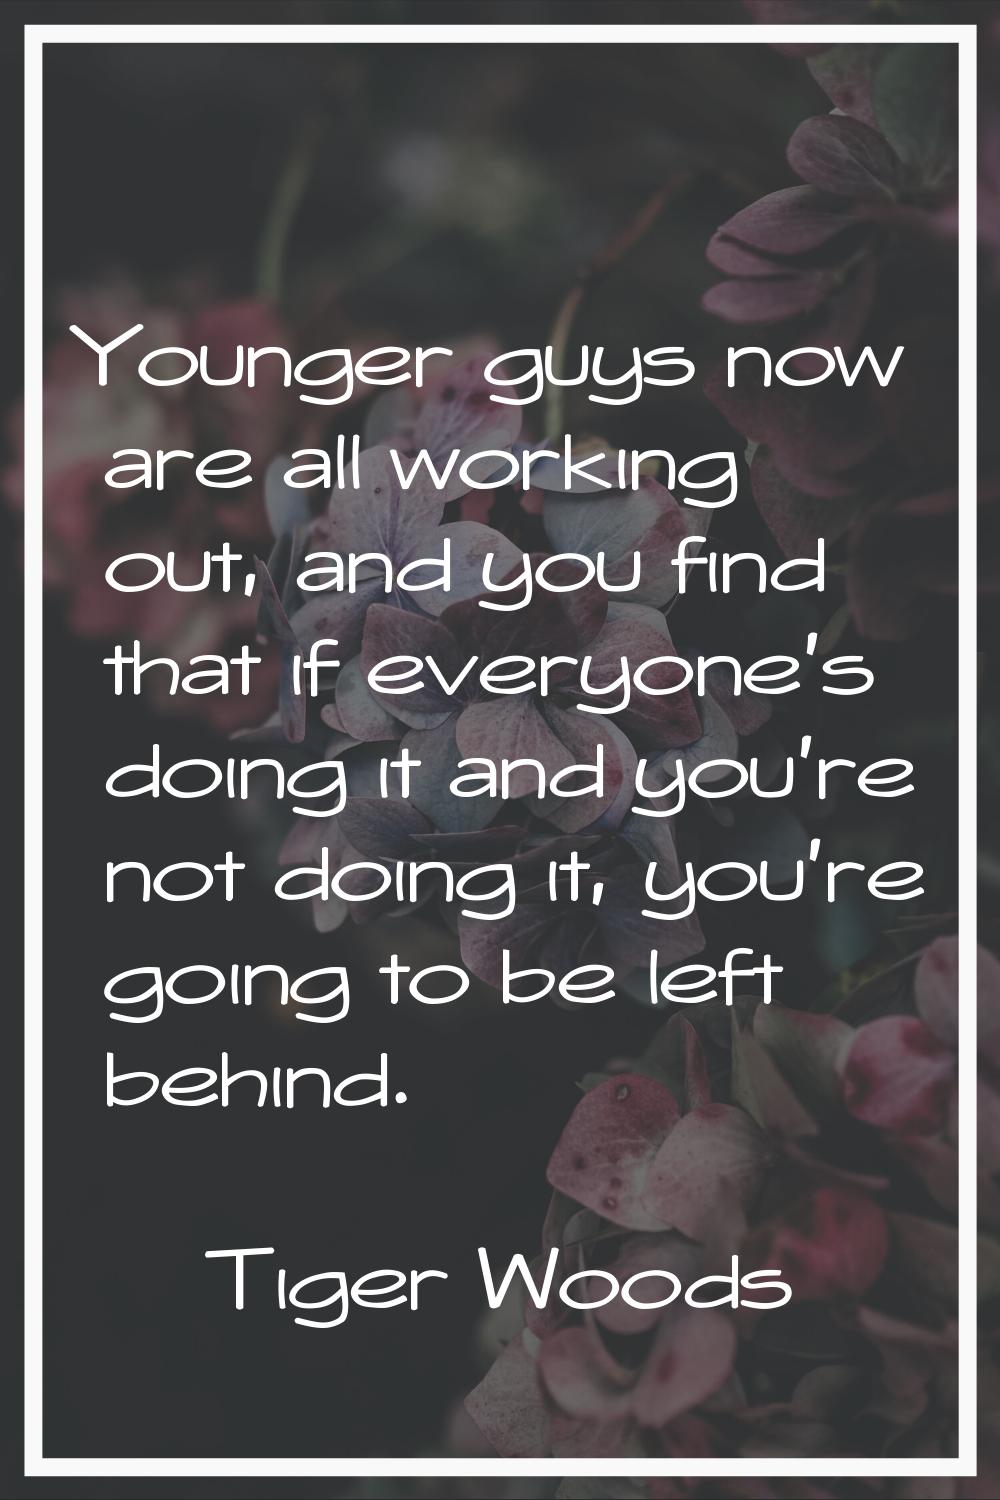 Younger guys now are all working out, and you find that if everyone's doing it and you're not doing